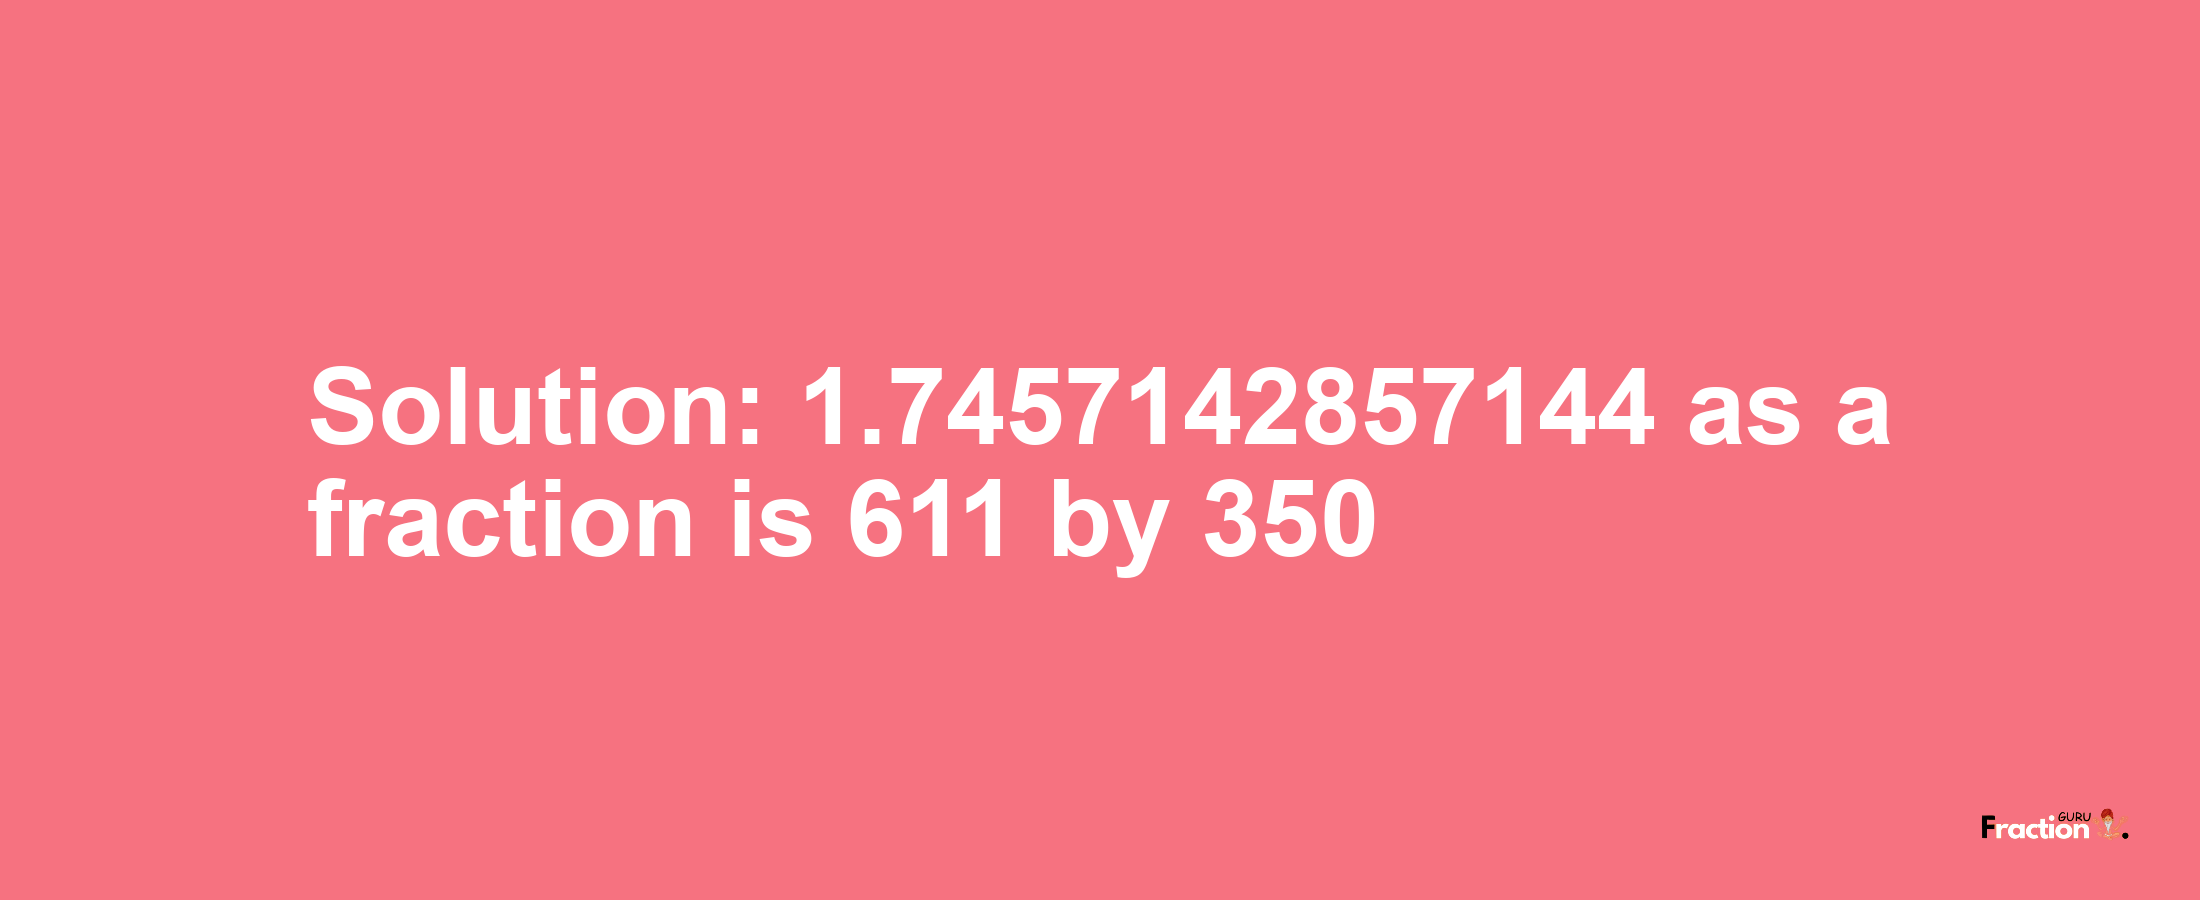 Solution:1.7457142857144 as a fraction is 611/350